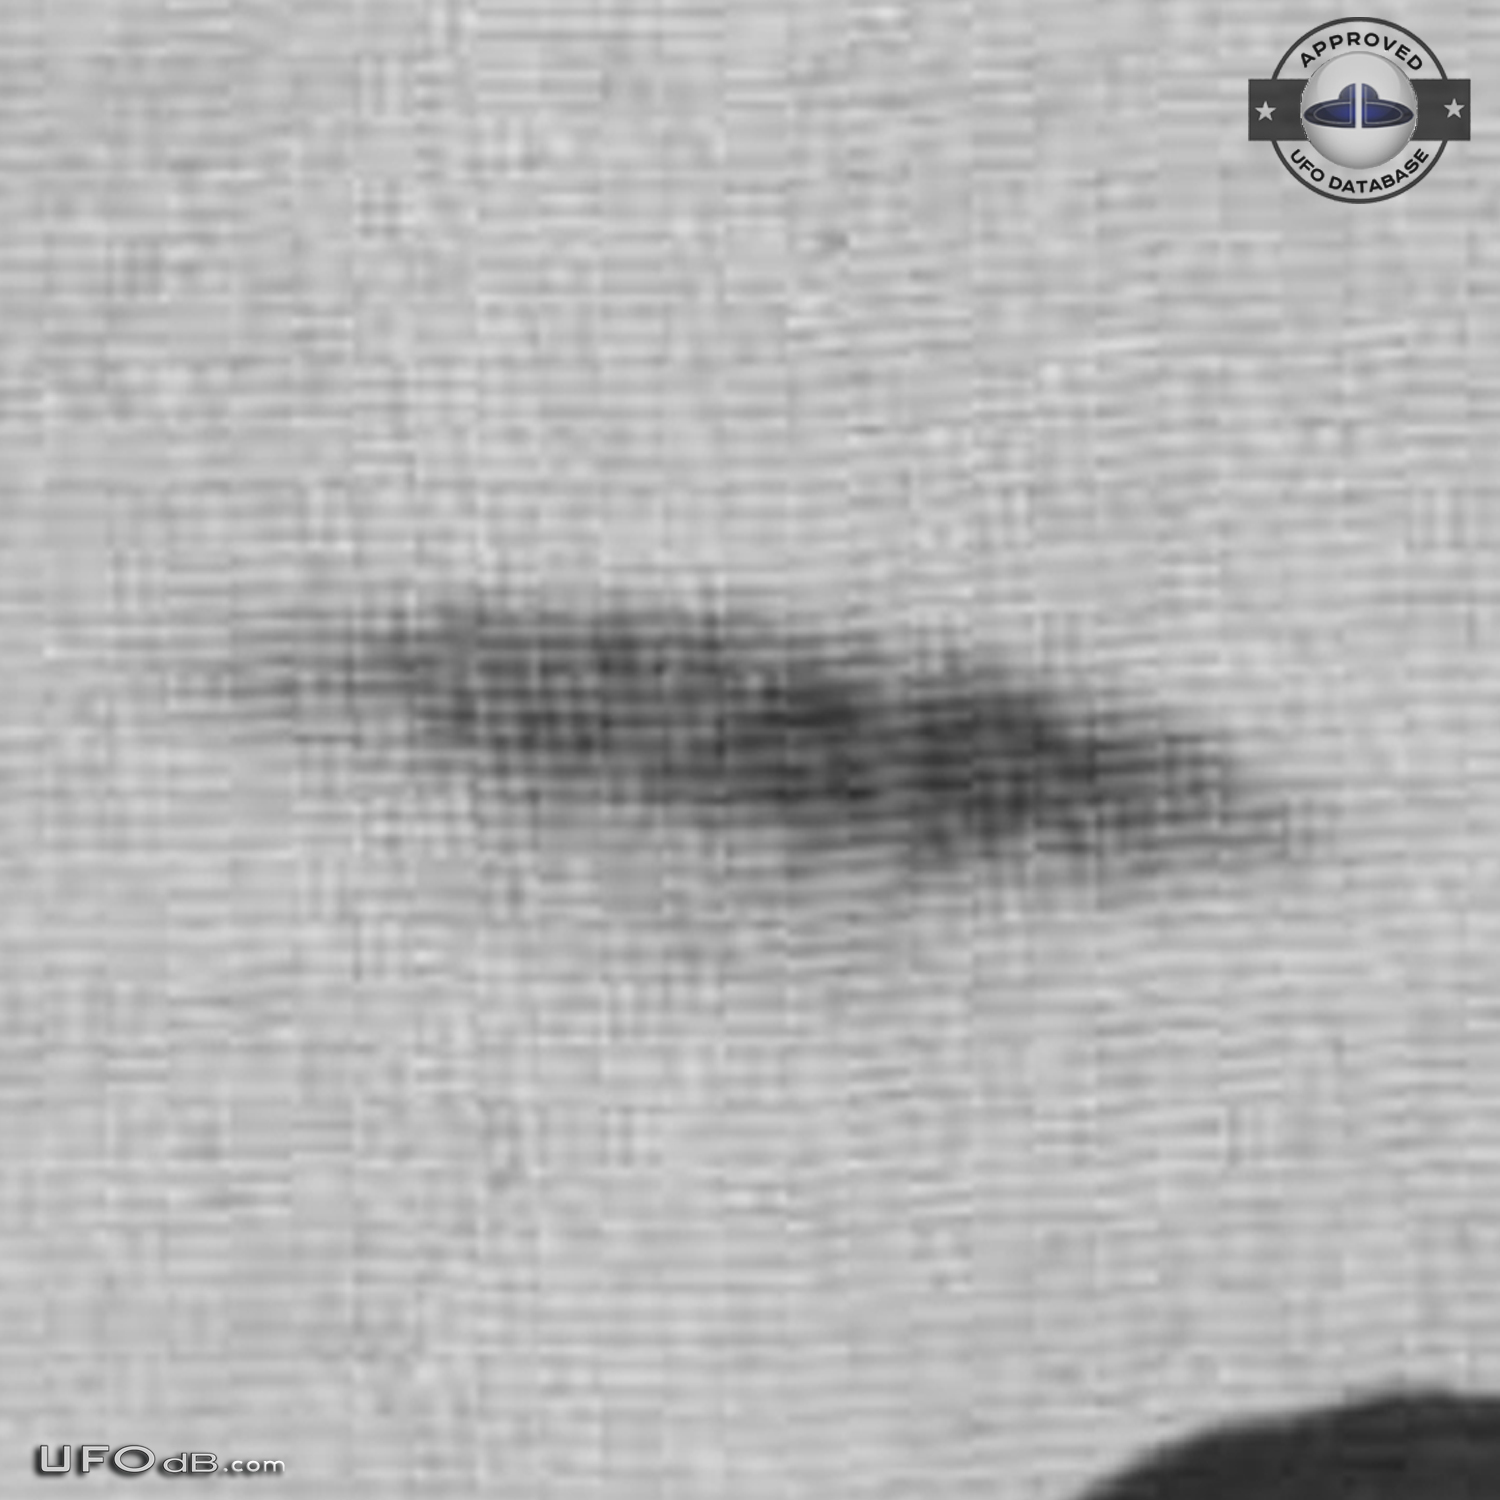 Old 1962 UFO picture coming from Argentina showing Saucer over hill UFO Picture #518-2